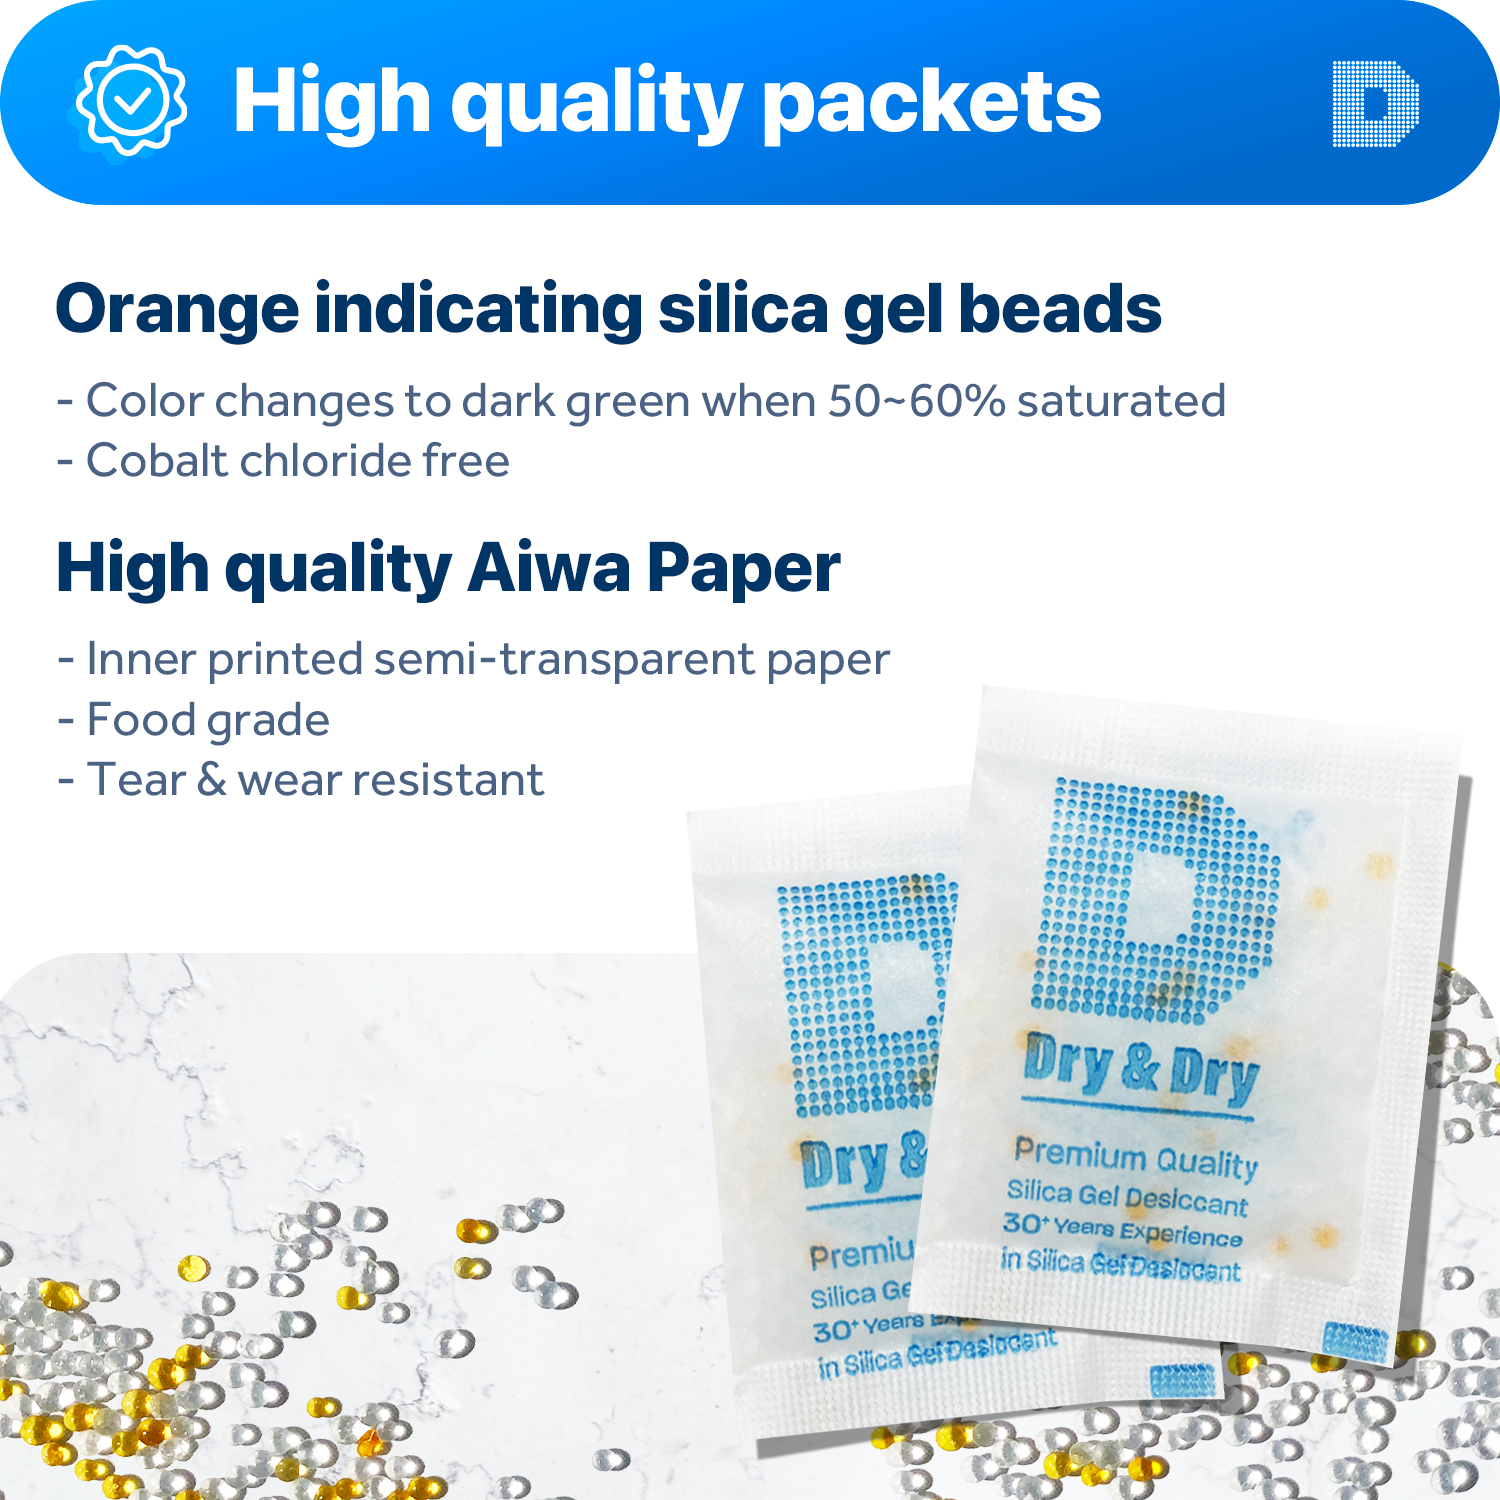 10 Gram [1,500 Packs] "Dry & Dry" Food Safe Orange Indicating(Orange to Dark Green) Mixed Silica Gel Packets - FDA Compliant(Rechargeable)